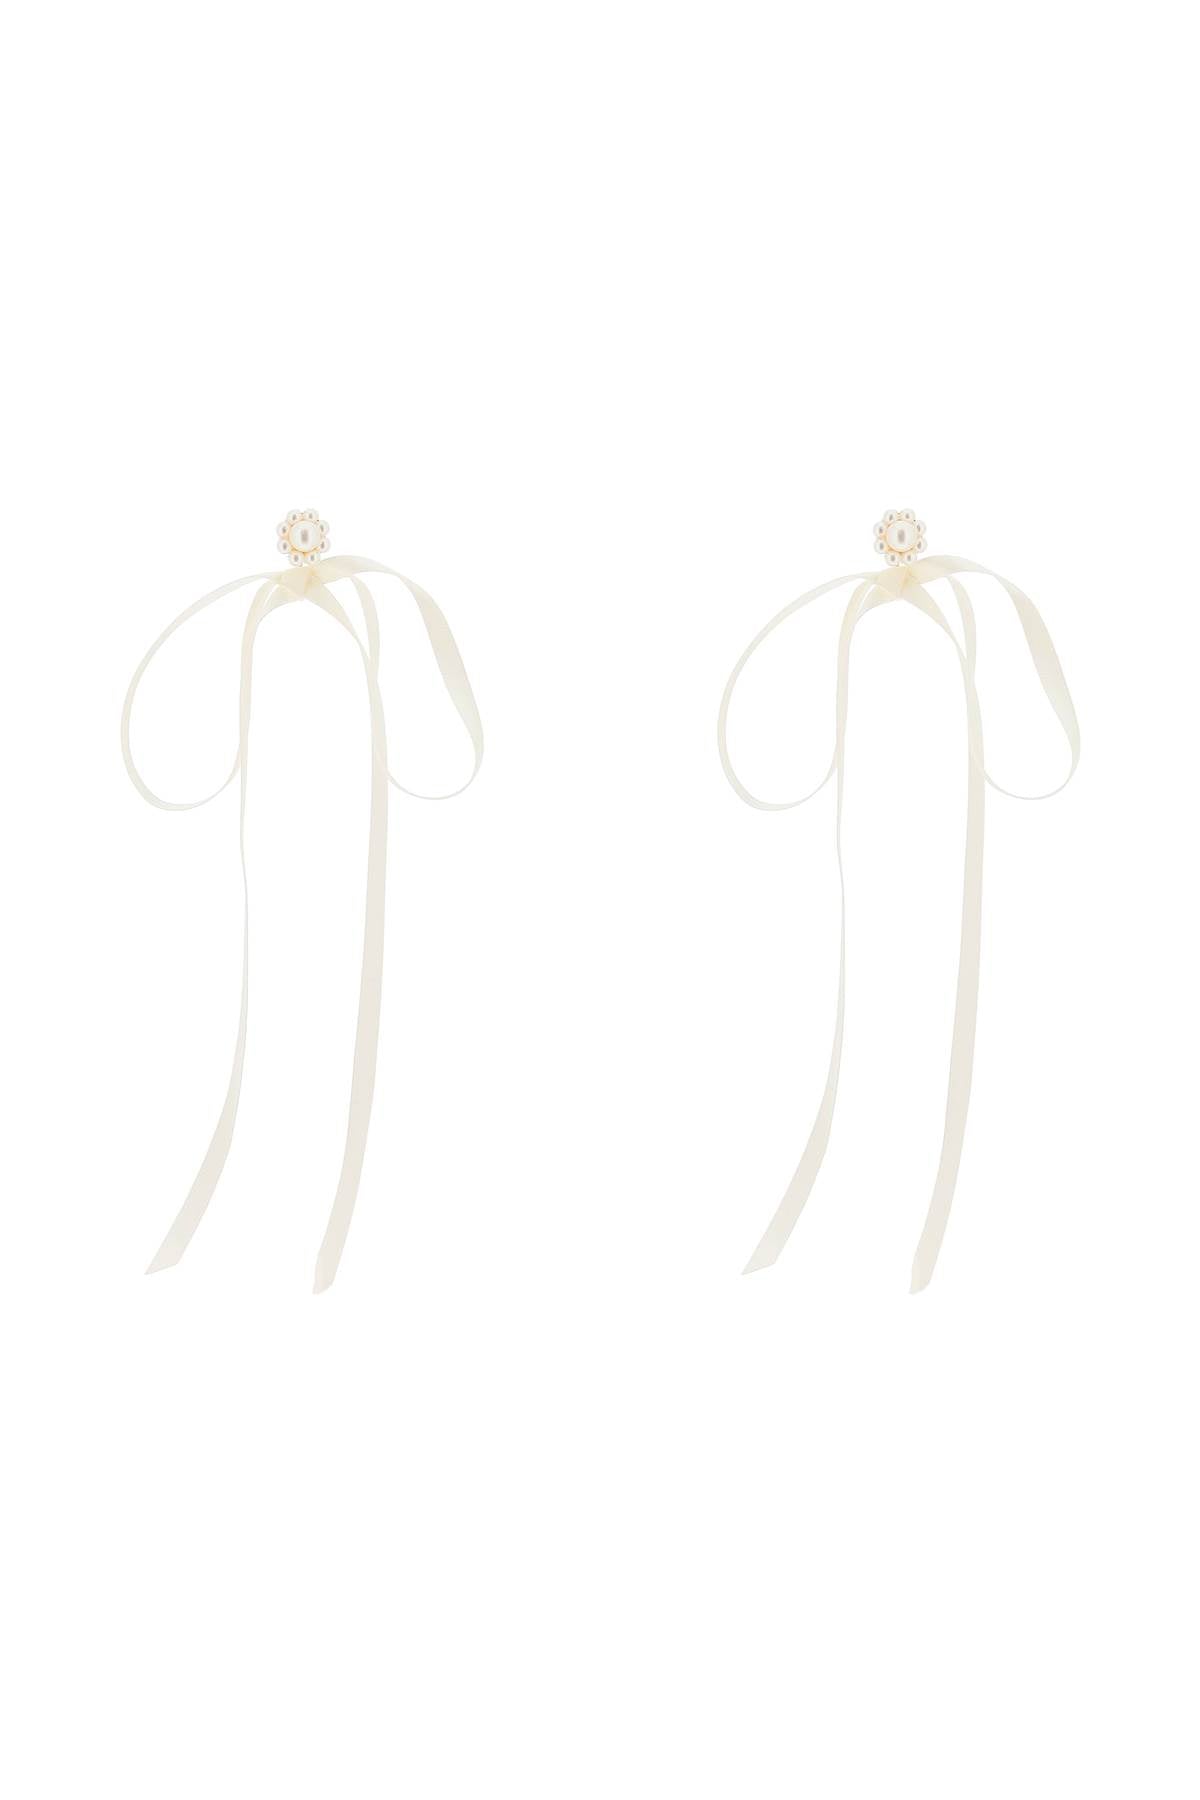 button pearl earrings with bow detail.-0